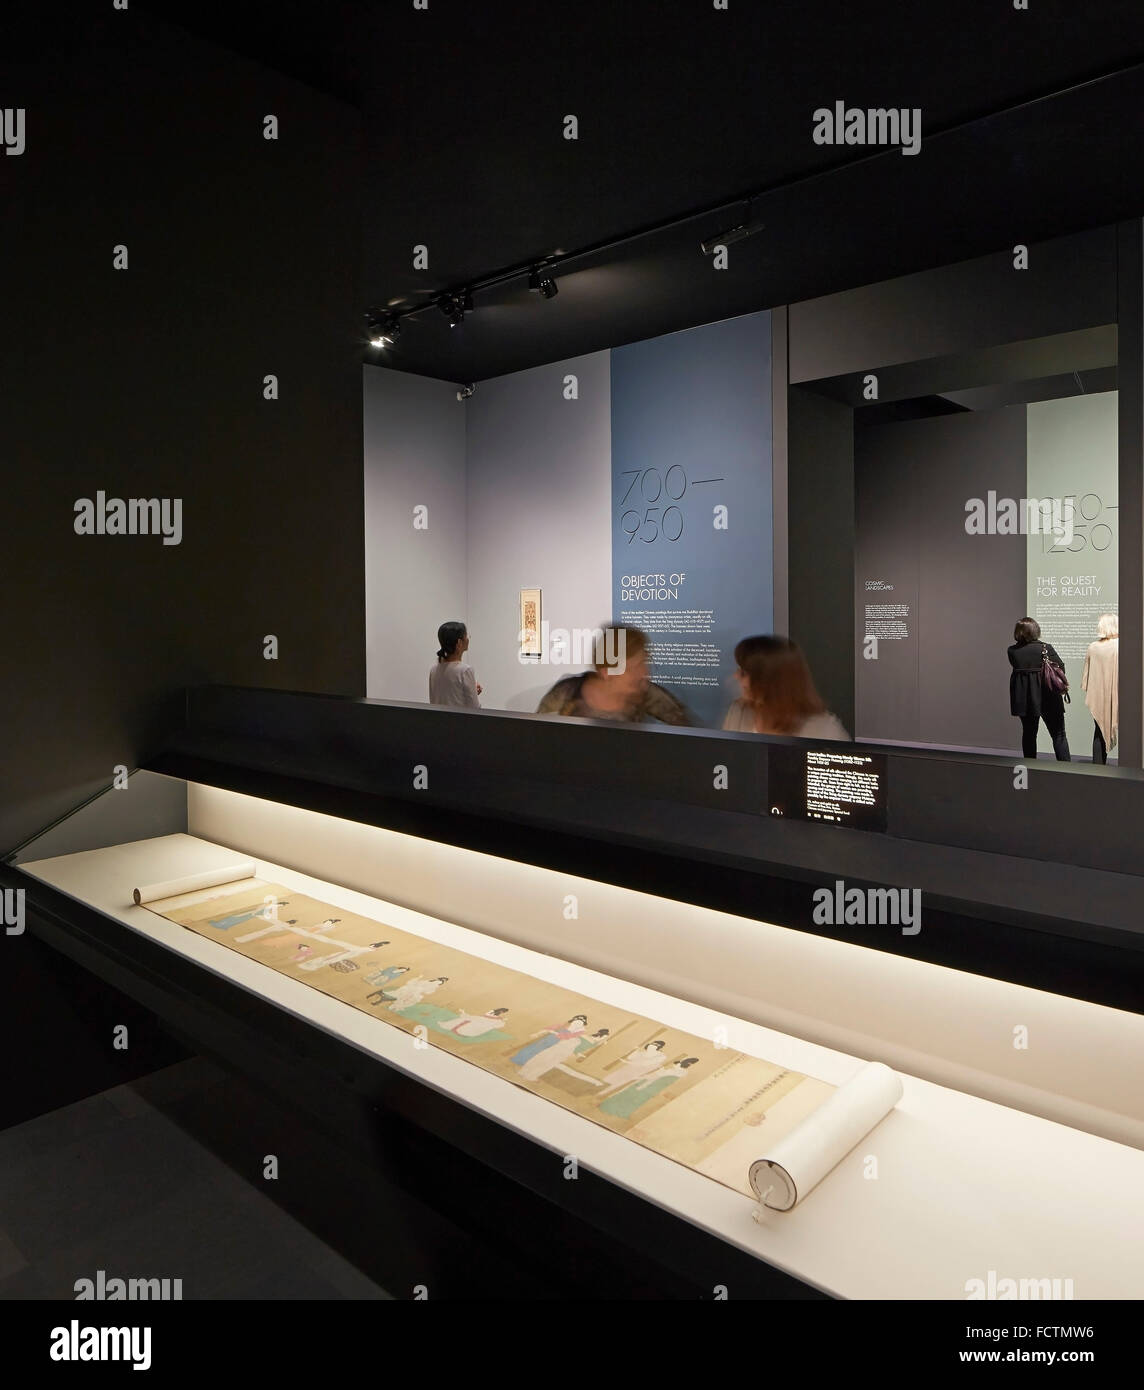 Horizontal display of hand scrolls. V&A Masterpieces of Chinese Painting, London, United Kingdom. Architect: Stanton Williams, 2 Stock Photo